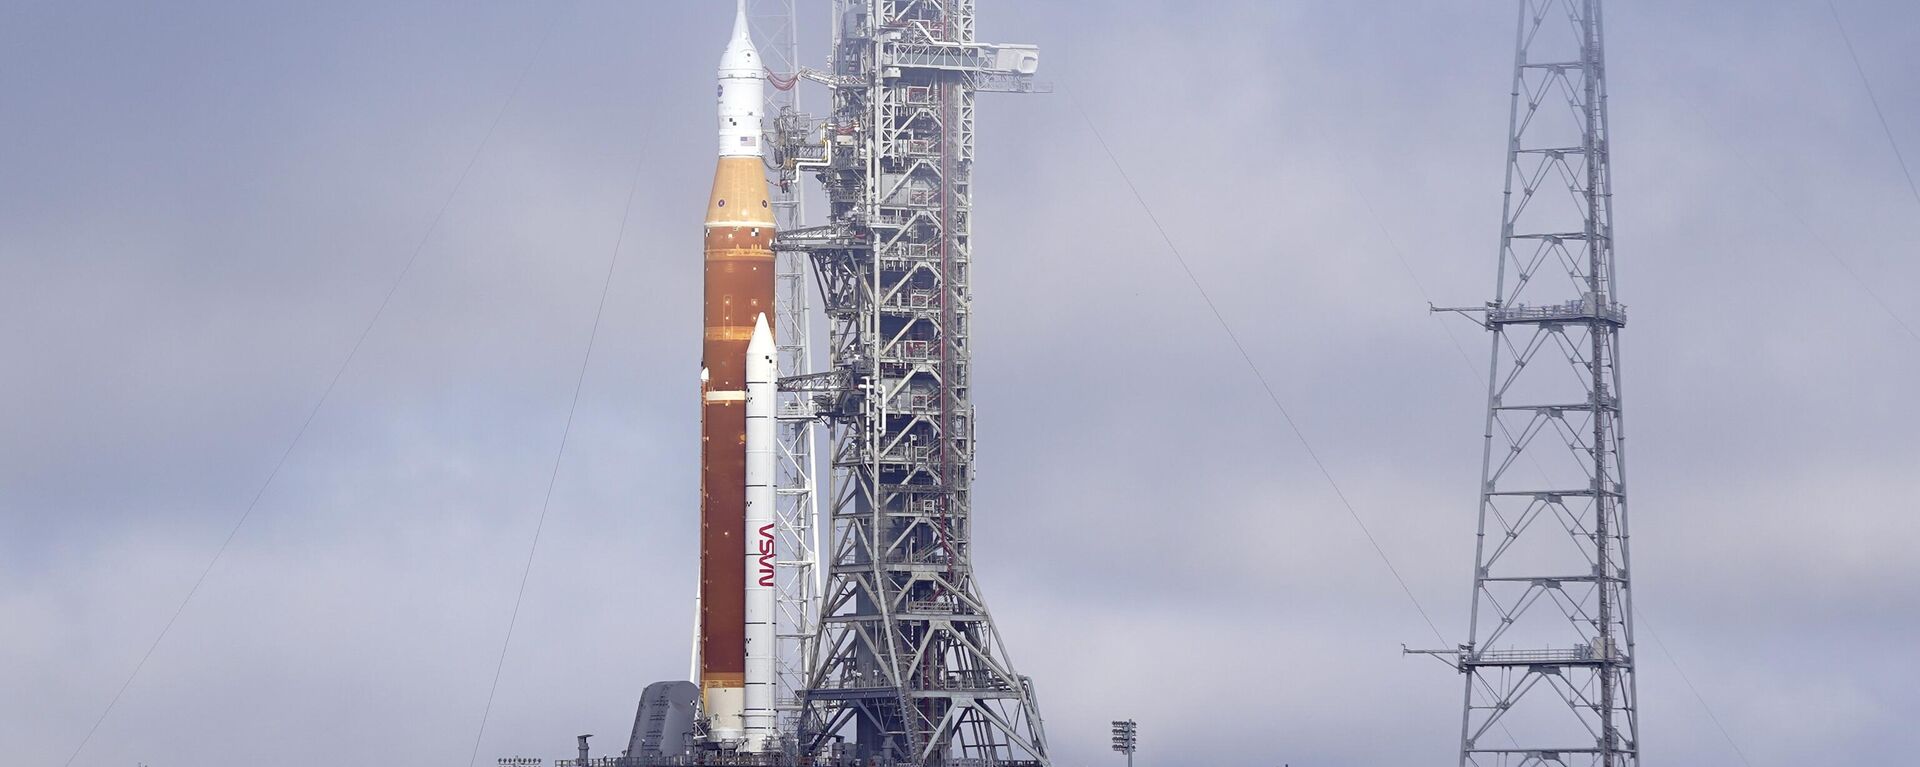 The NASA Artemis rocket with the Orion spacecraft aboard stands on pad 39B at the Kennedy Space Center in Cape Canaveral, Fla., Friday, March 18, 2022. NASA is kicking off a critical countdown test for its new moon rocket. The two-day dress rehearsal began Friday, April 1, 2022 at Florida's Kennedy Space Center and will culminate Sunday with the loading of the rocket's fuel tanks. - Sputnik International, 1920, 05.04.2022